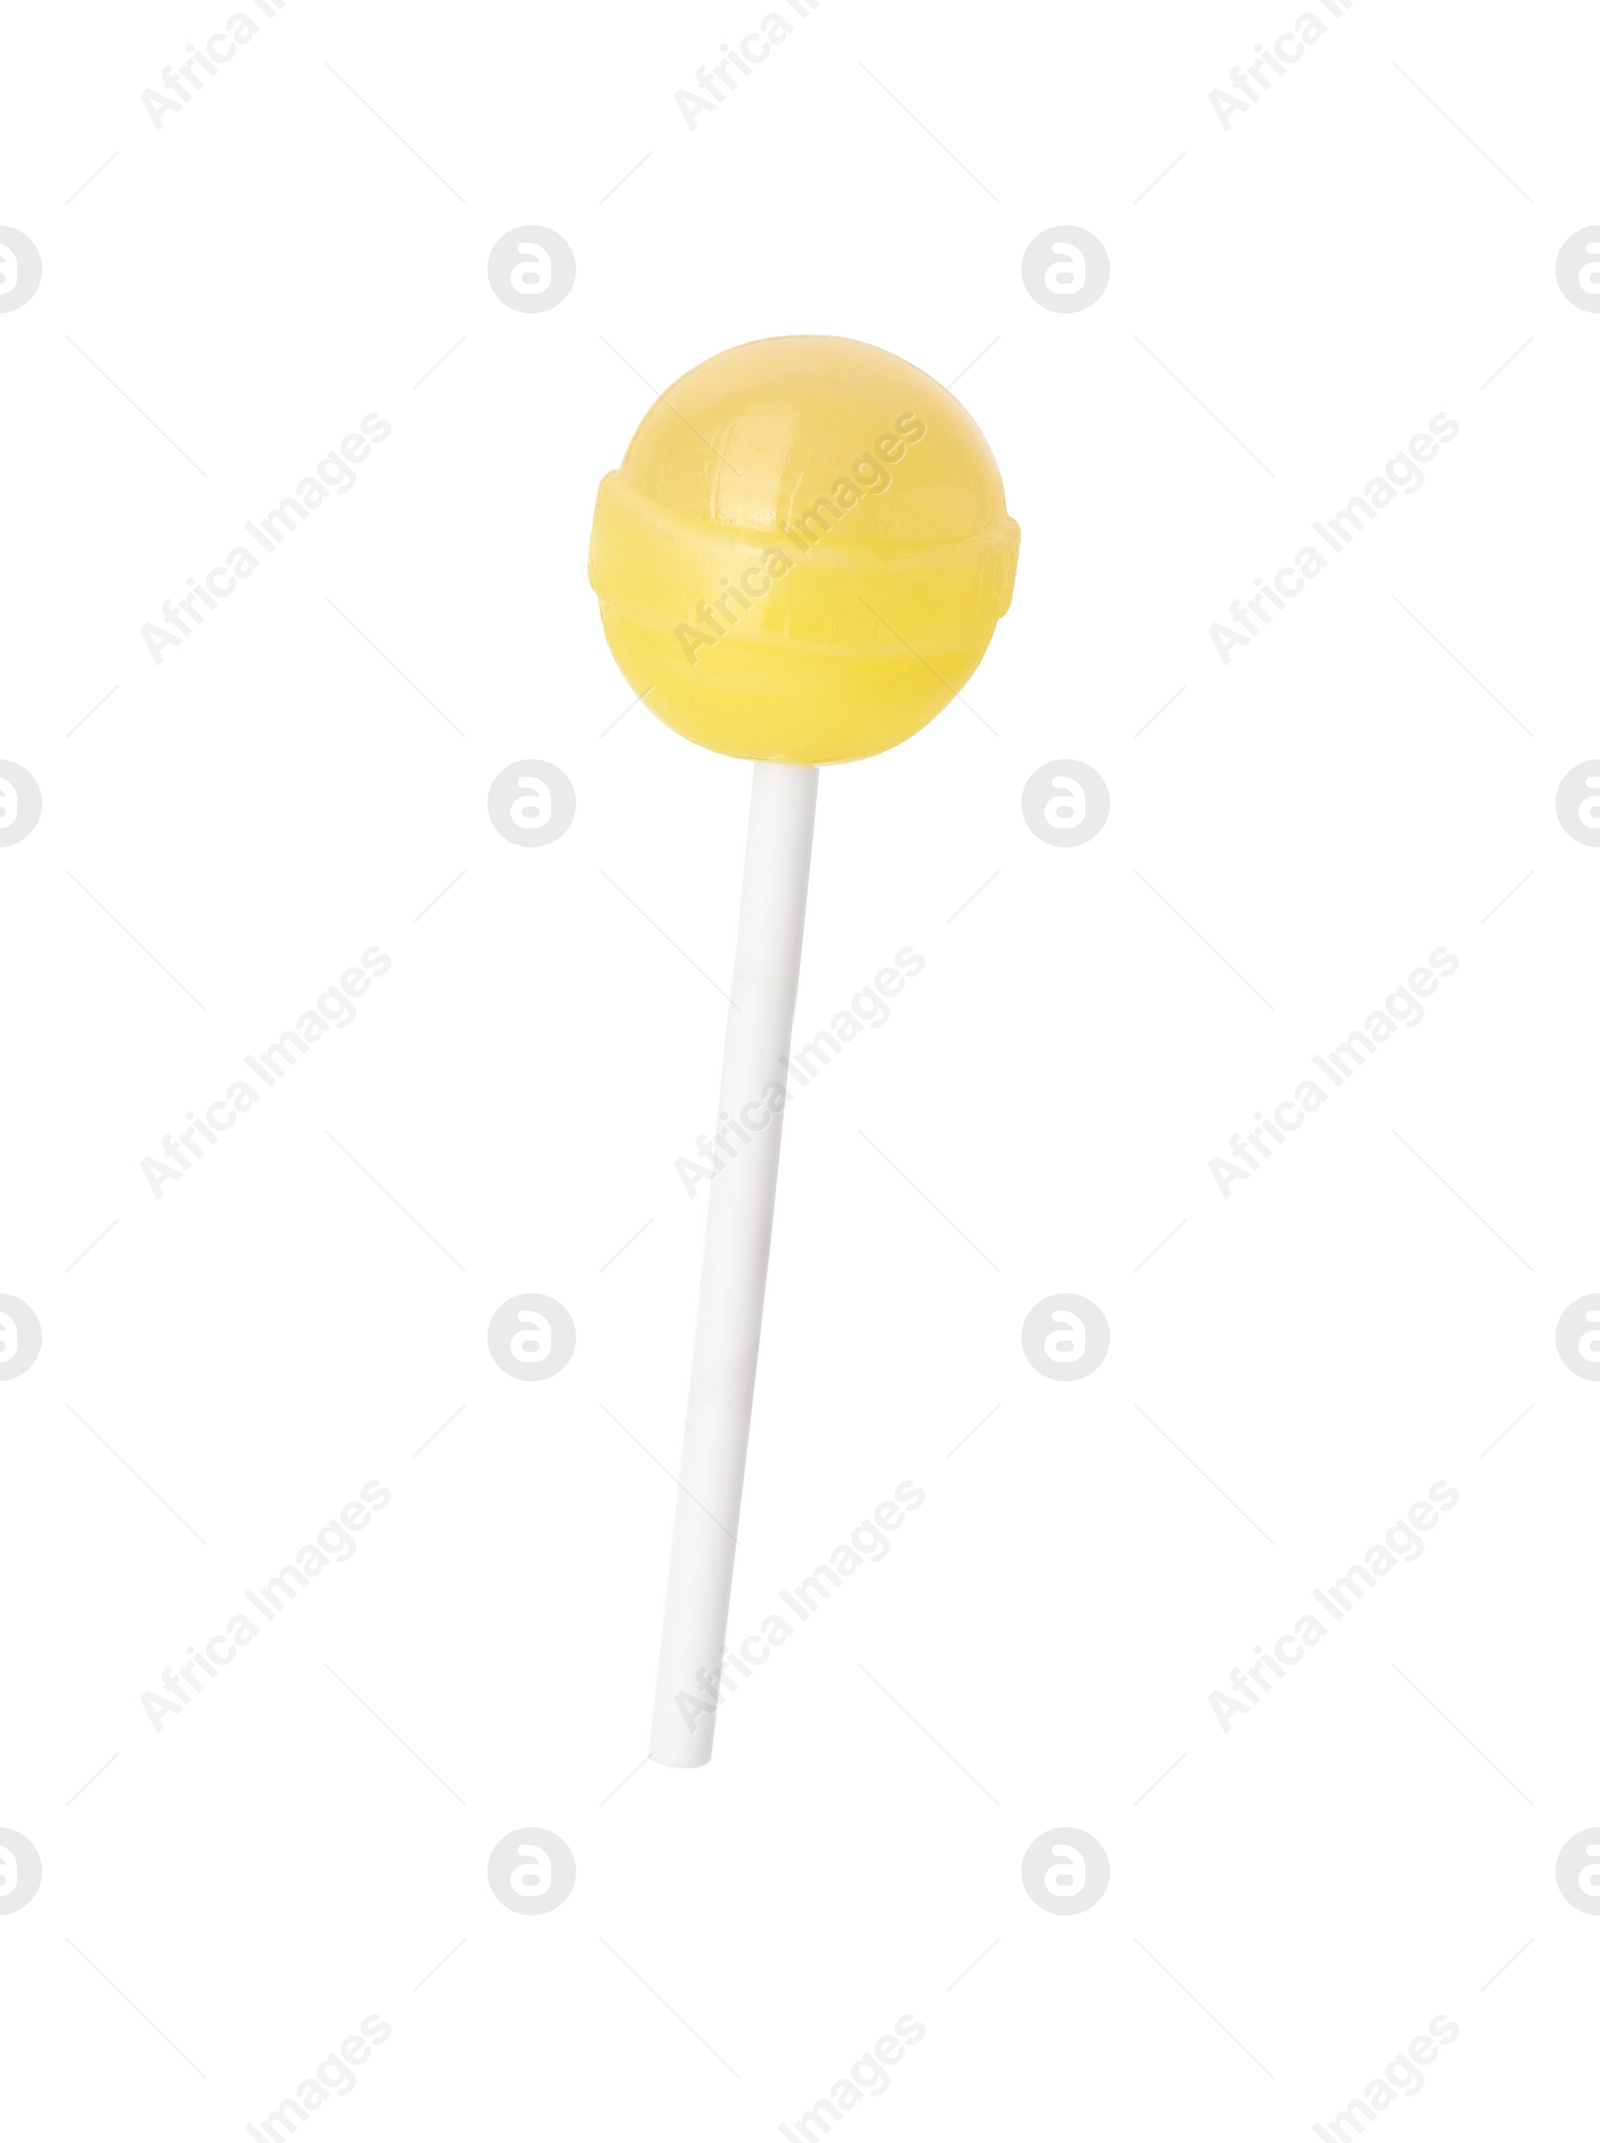 Photo of One sweet yellow lollipop isolated on white